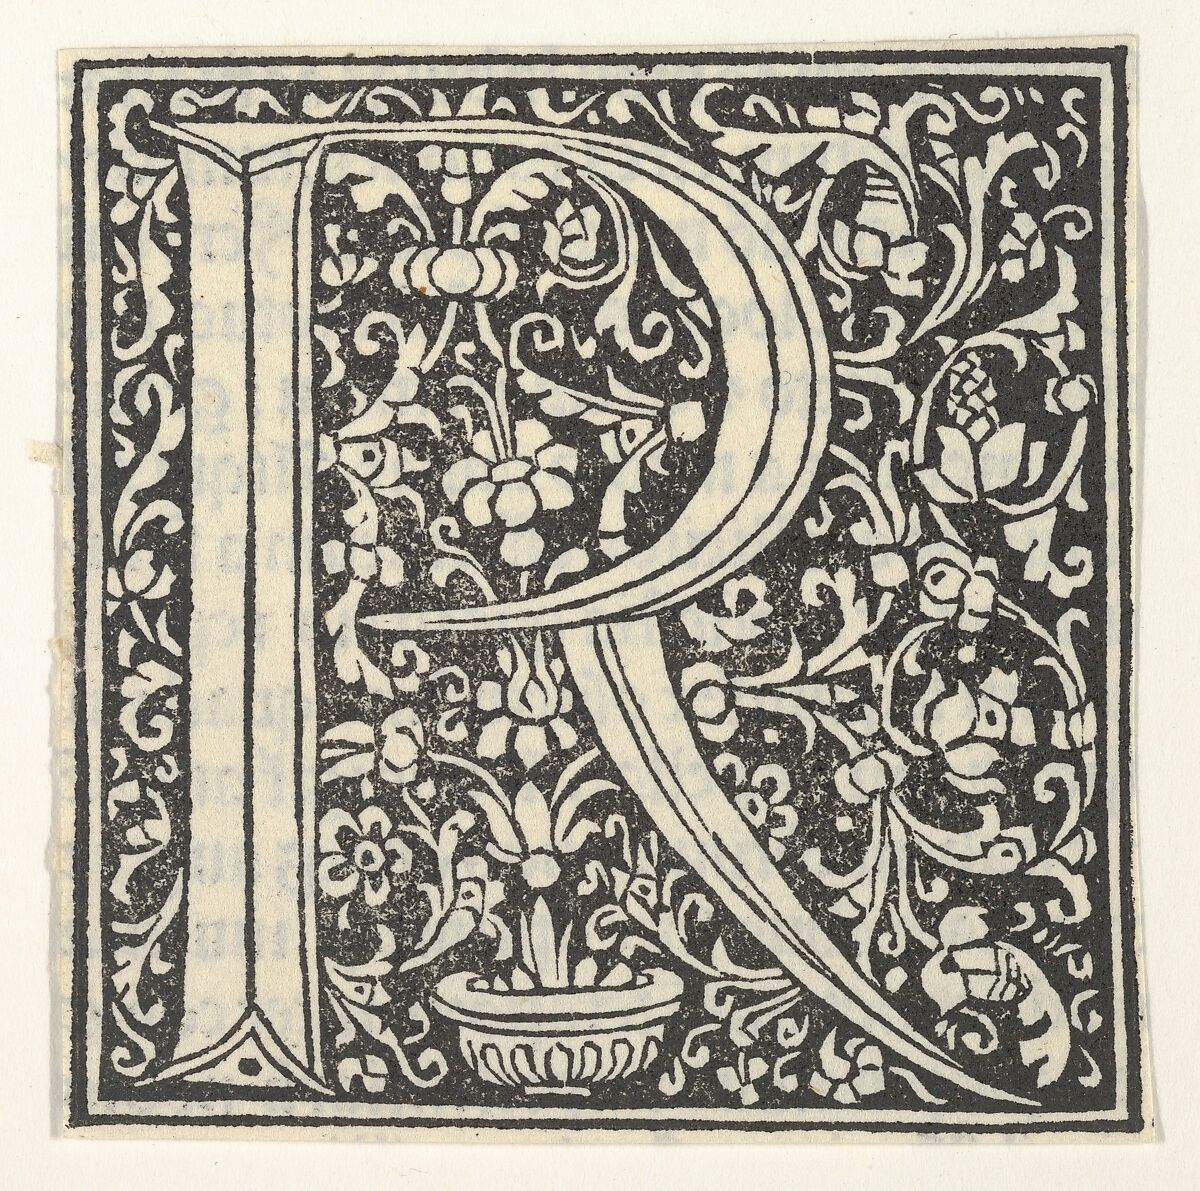 Initial letter R with floral pattern, Anonymous, Italian, 15th century, Woodcut 